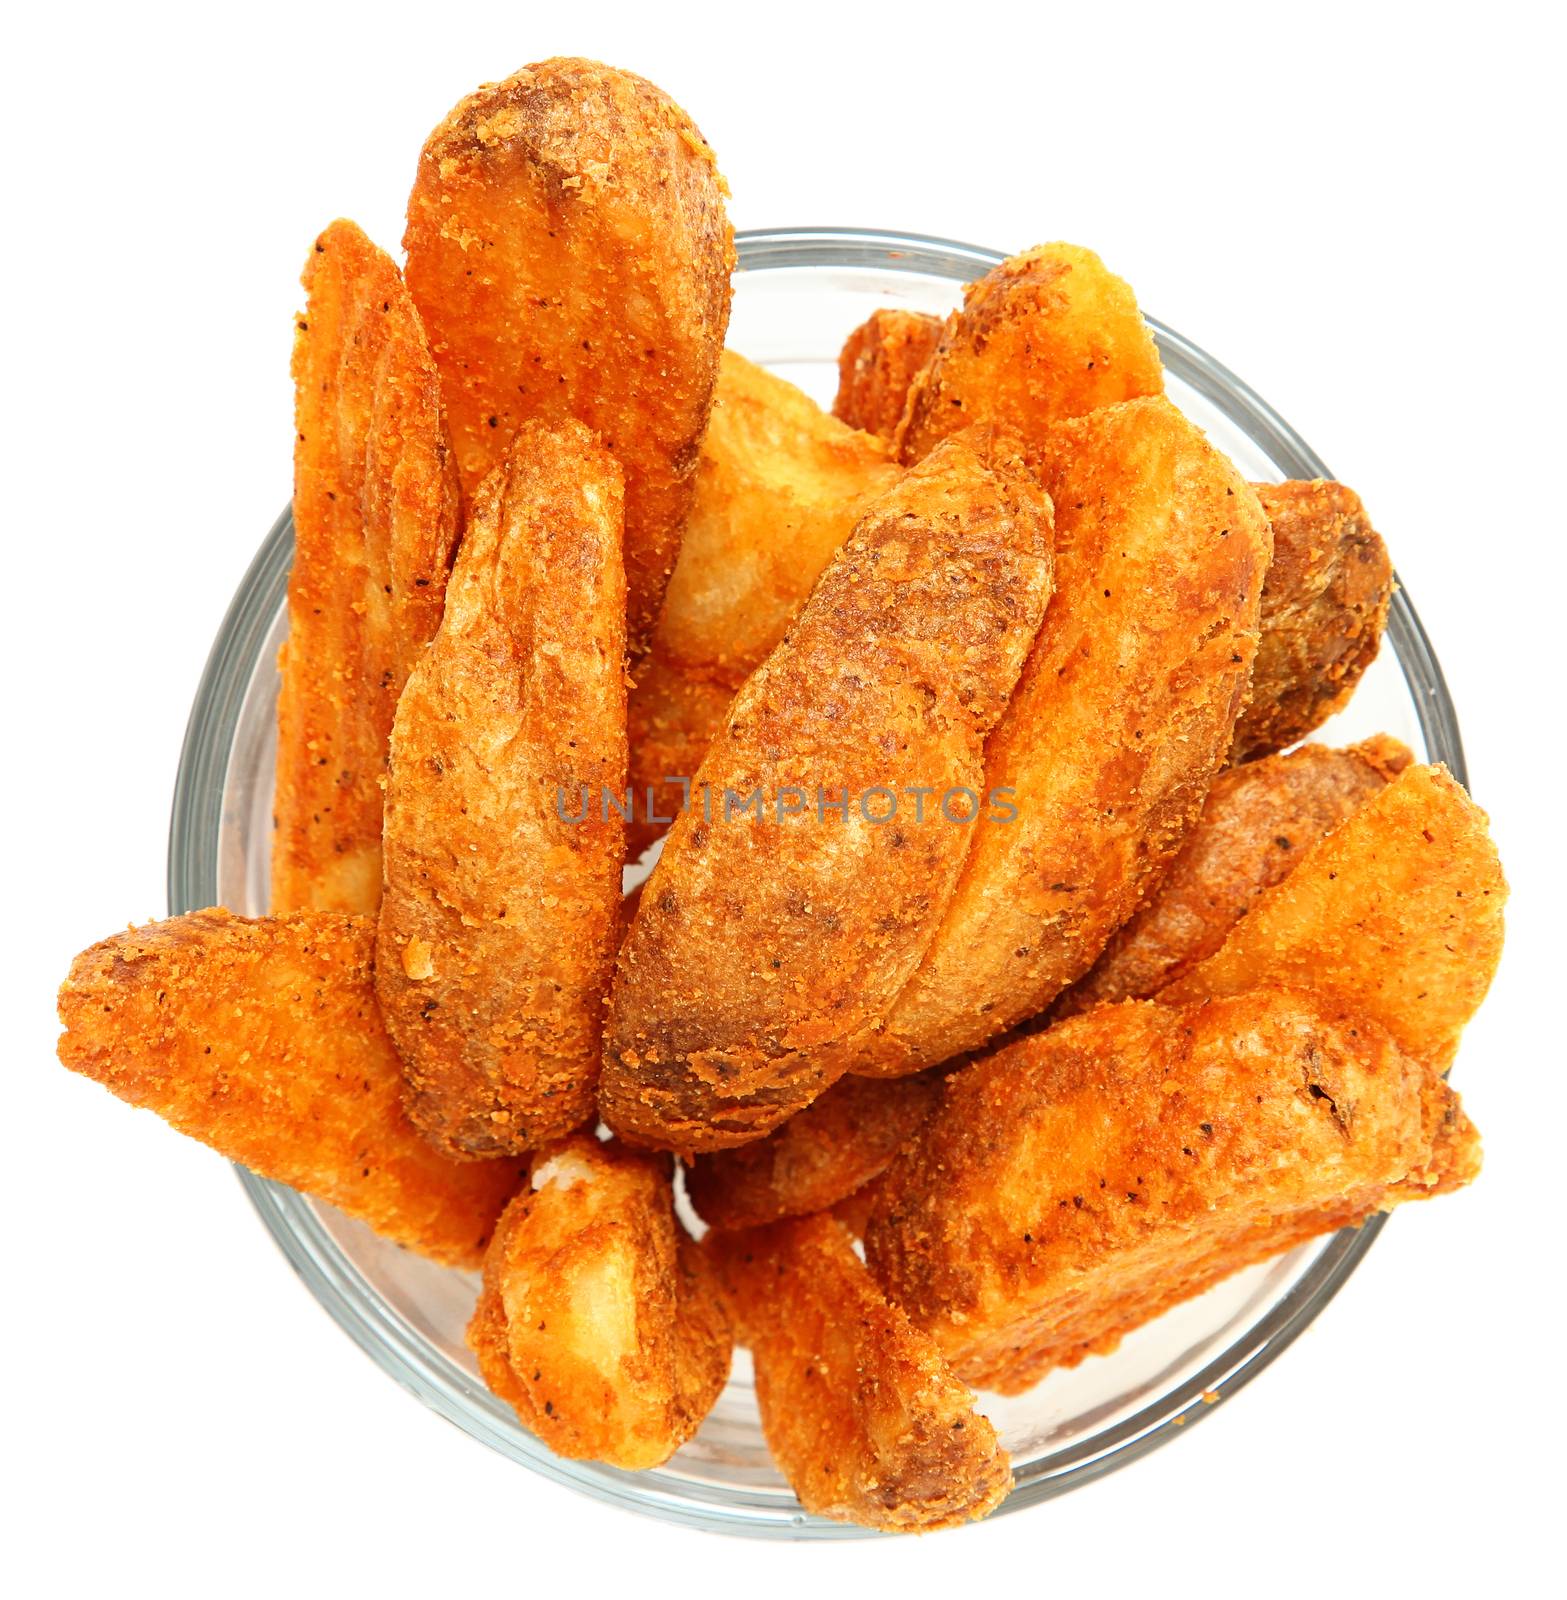 Spicy Potato Wedges in Glass Bowl Over White by duplass